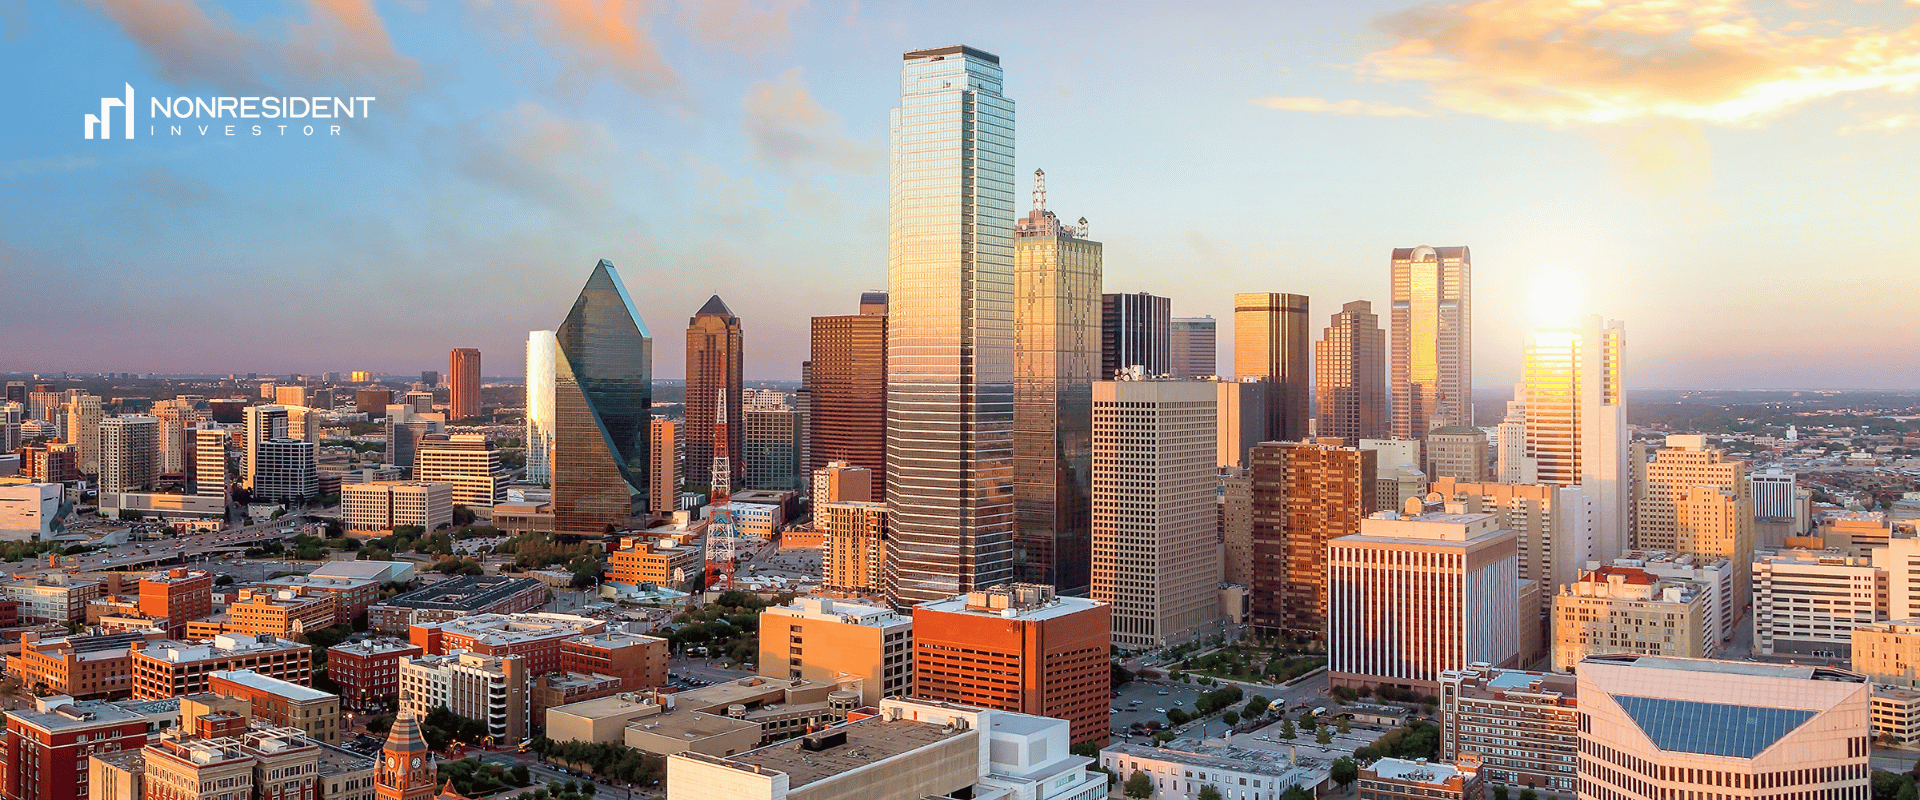 Texas offers lower prices on real estate and has better economy